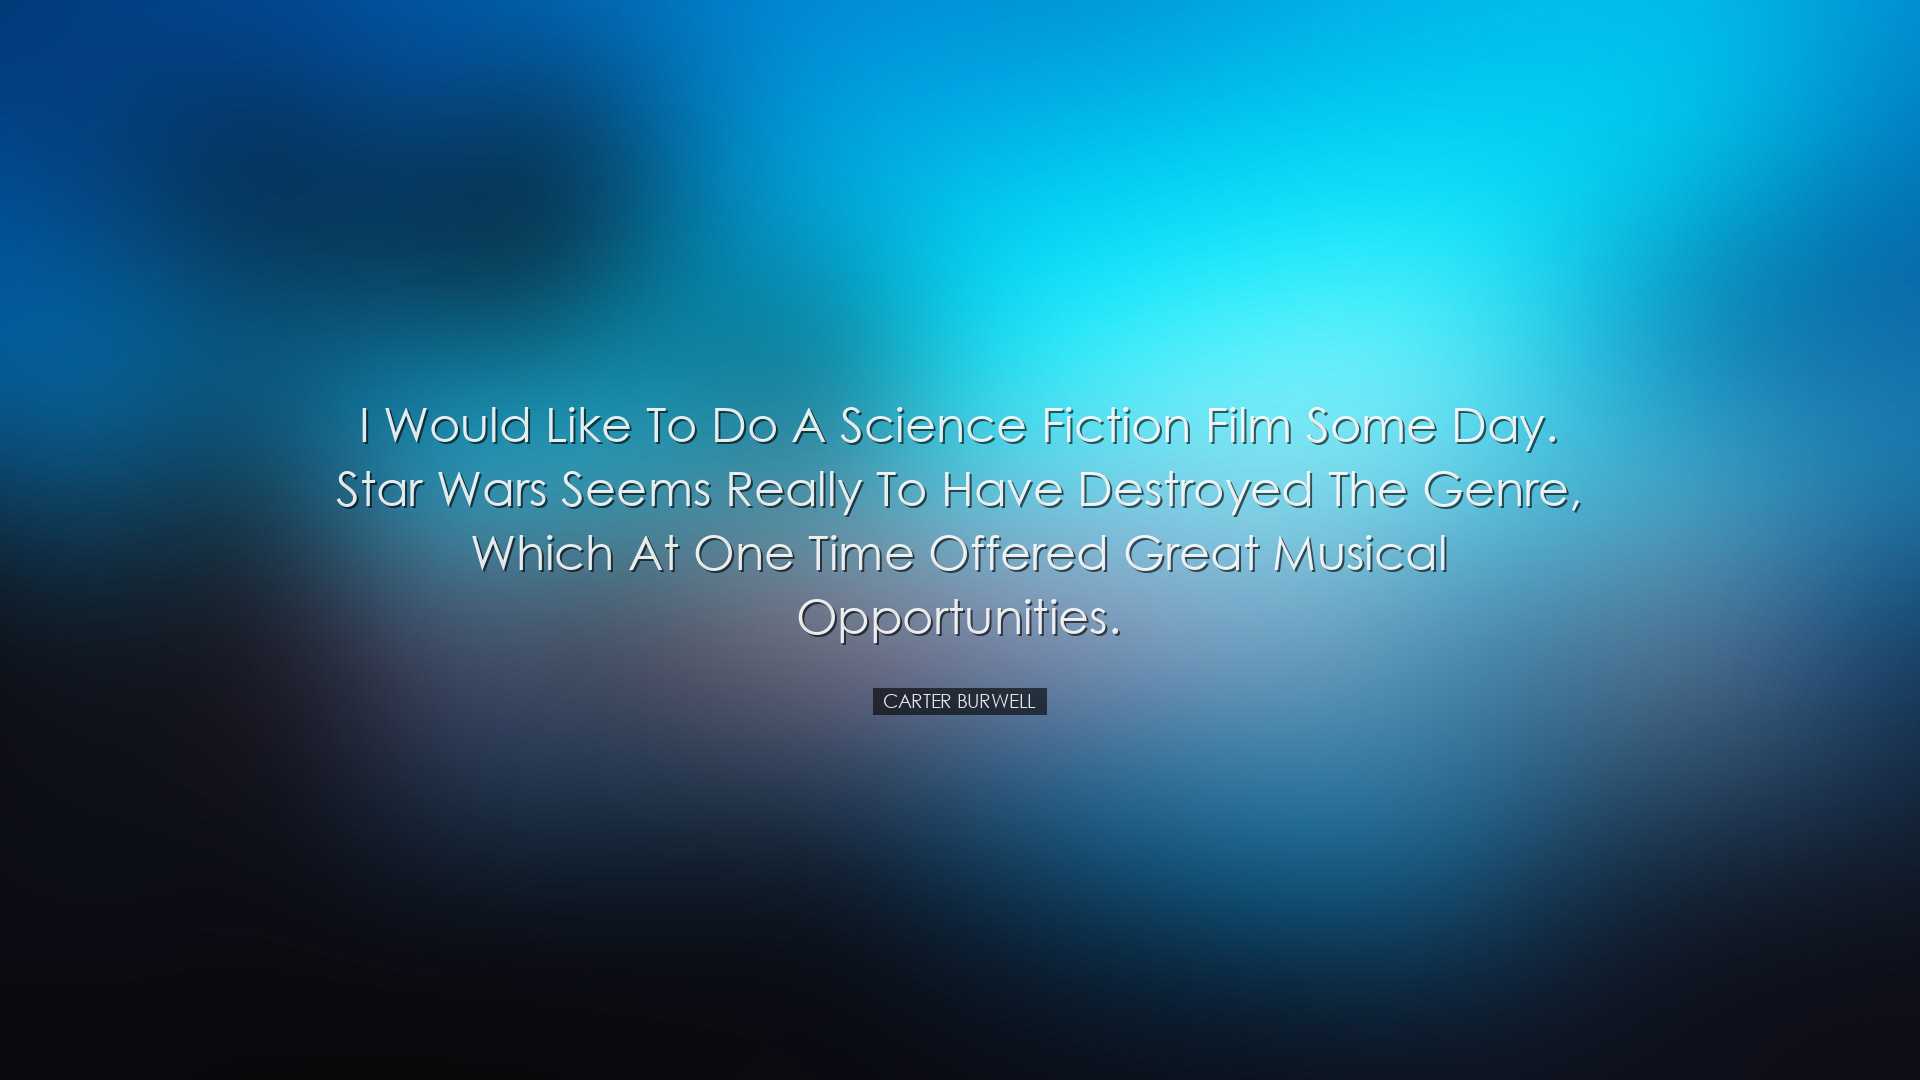 I would like to do a science fiction film some day. Star Wars seem